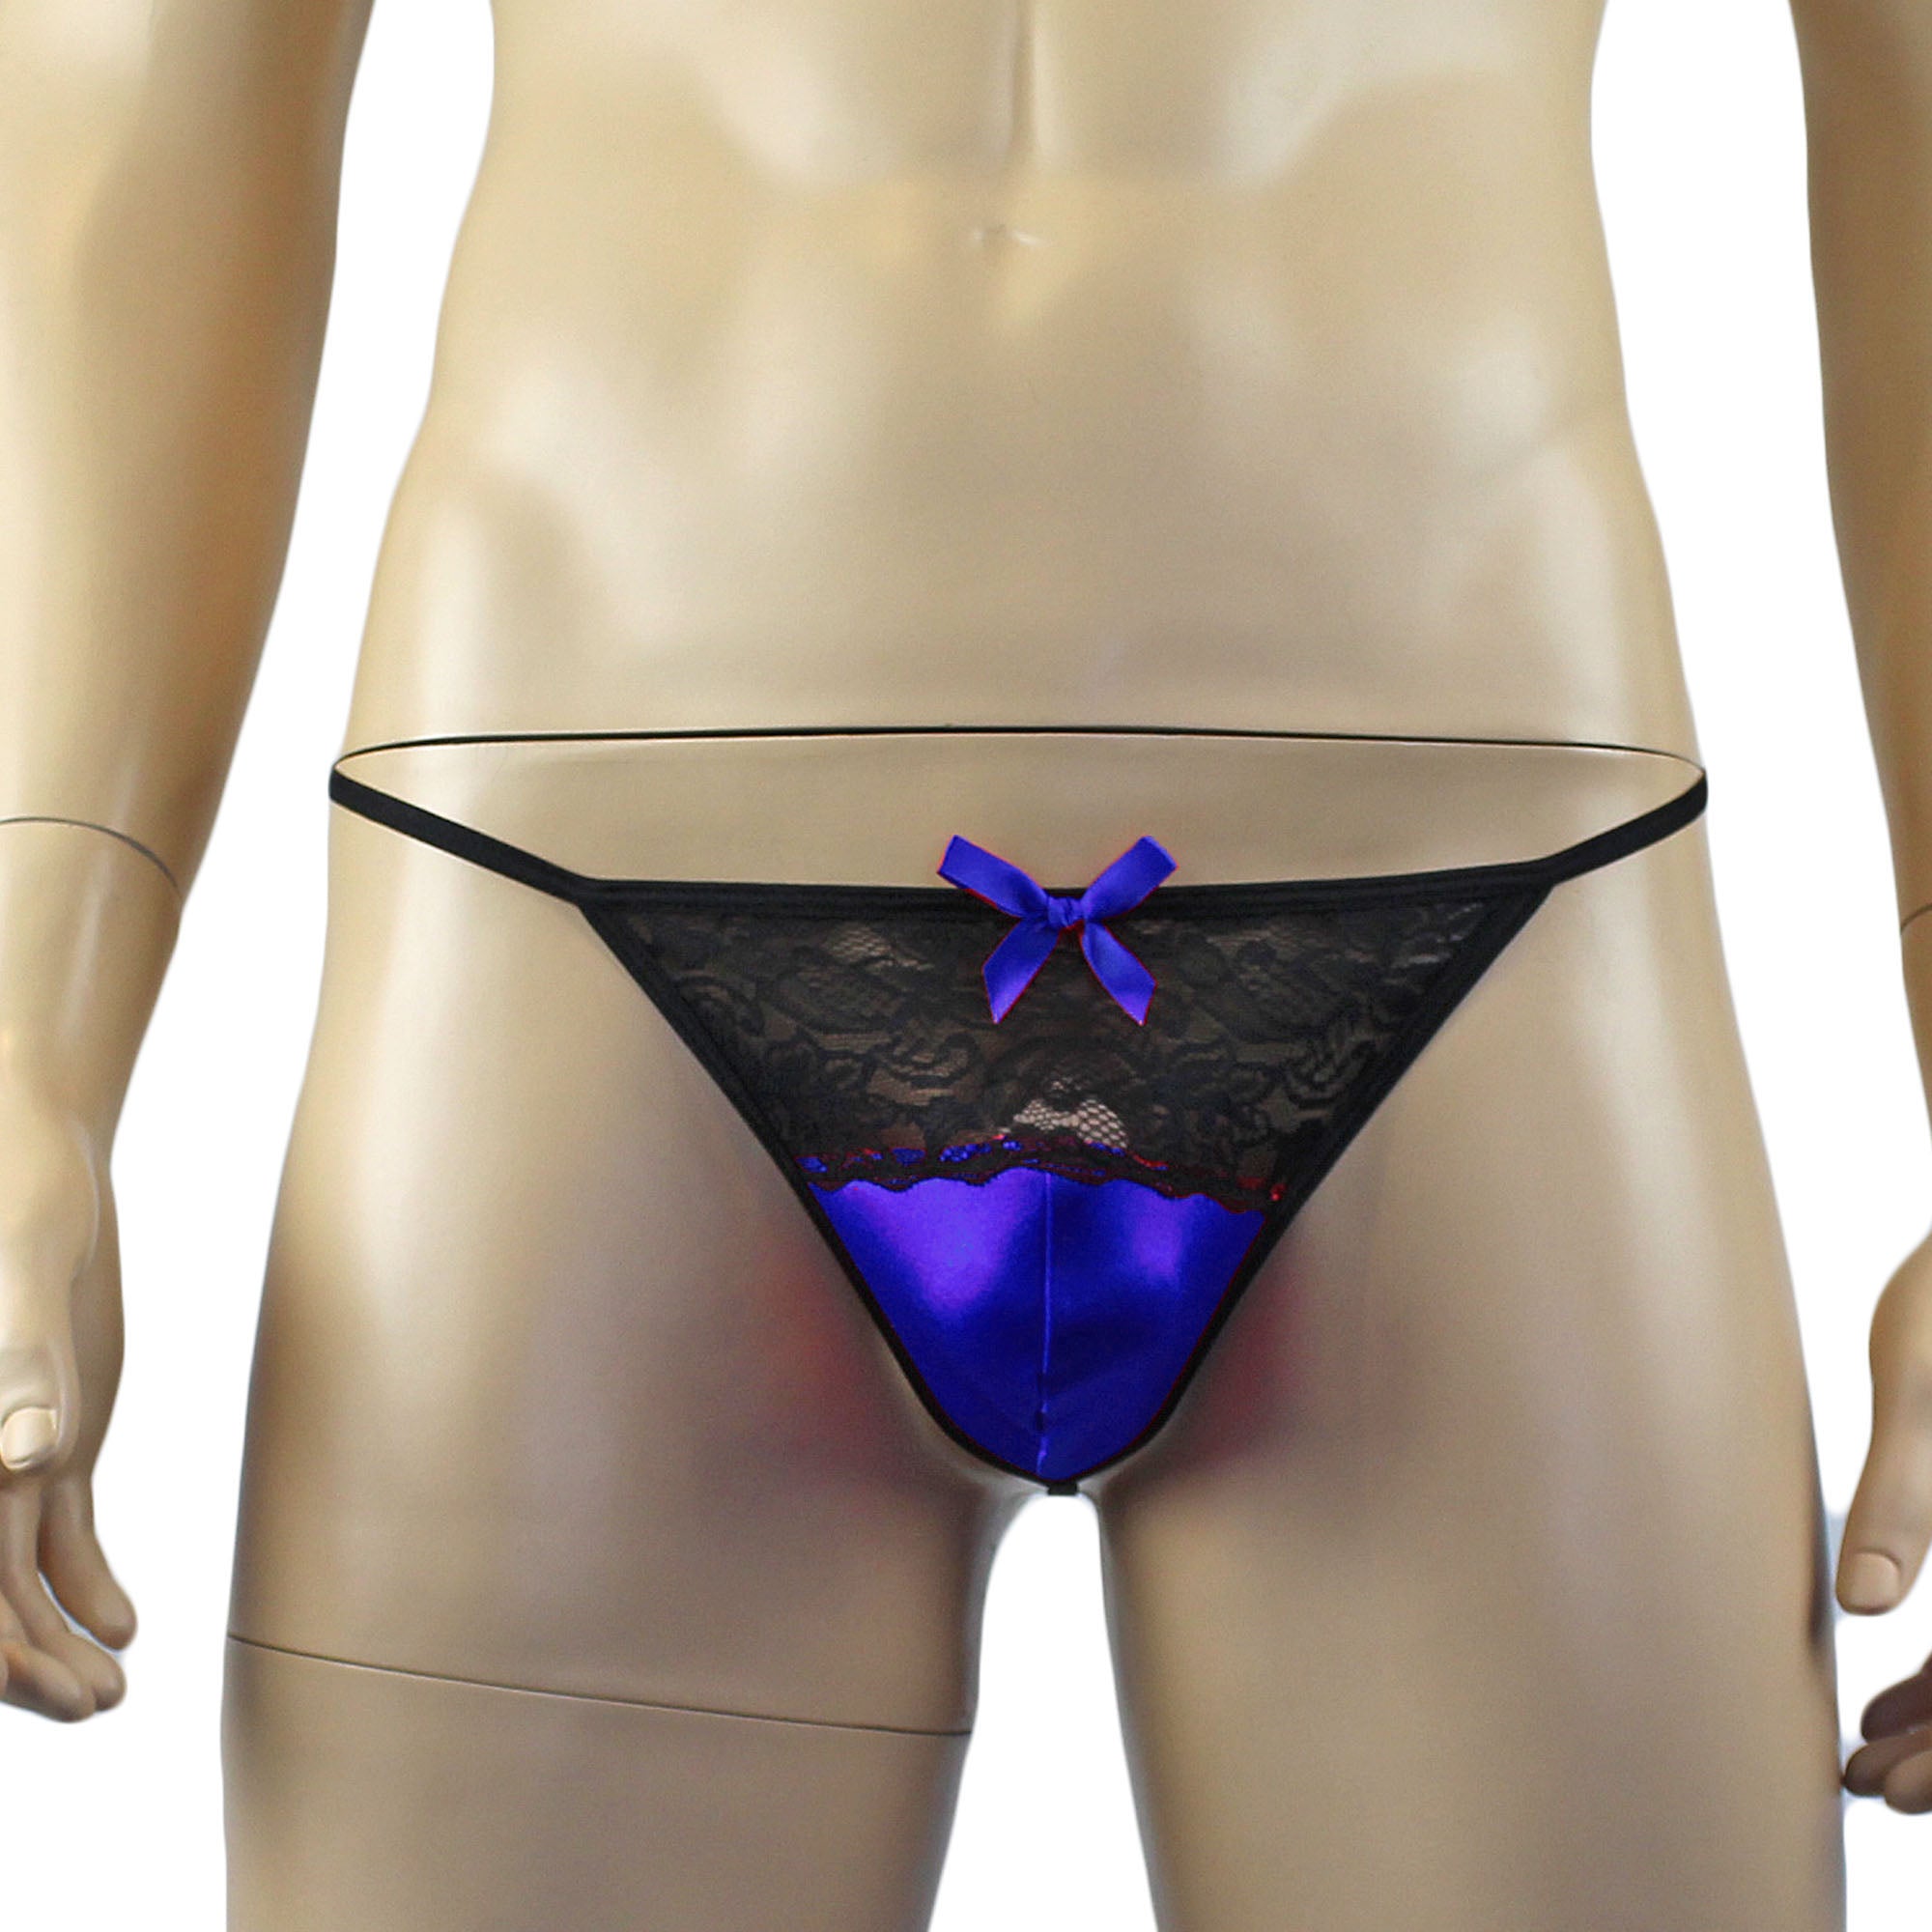 Mens Joanne Lacey G string with Bow Blue and Black Lace